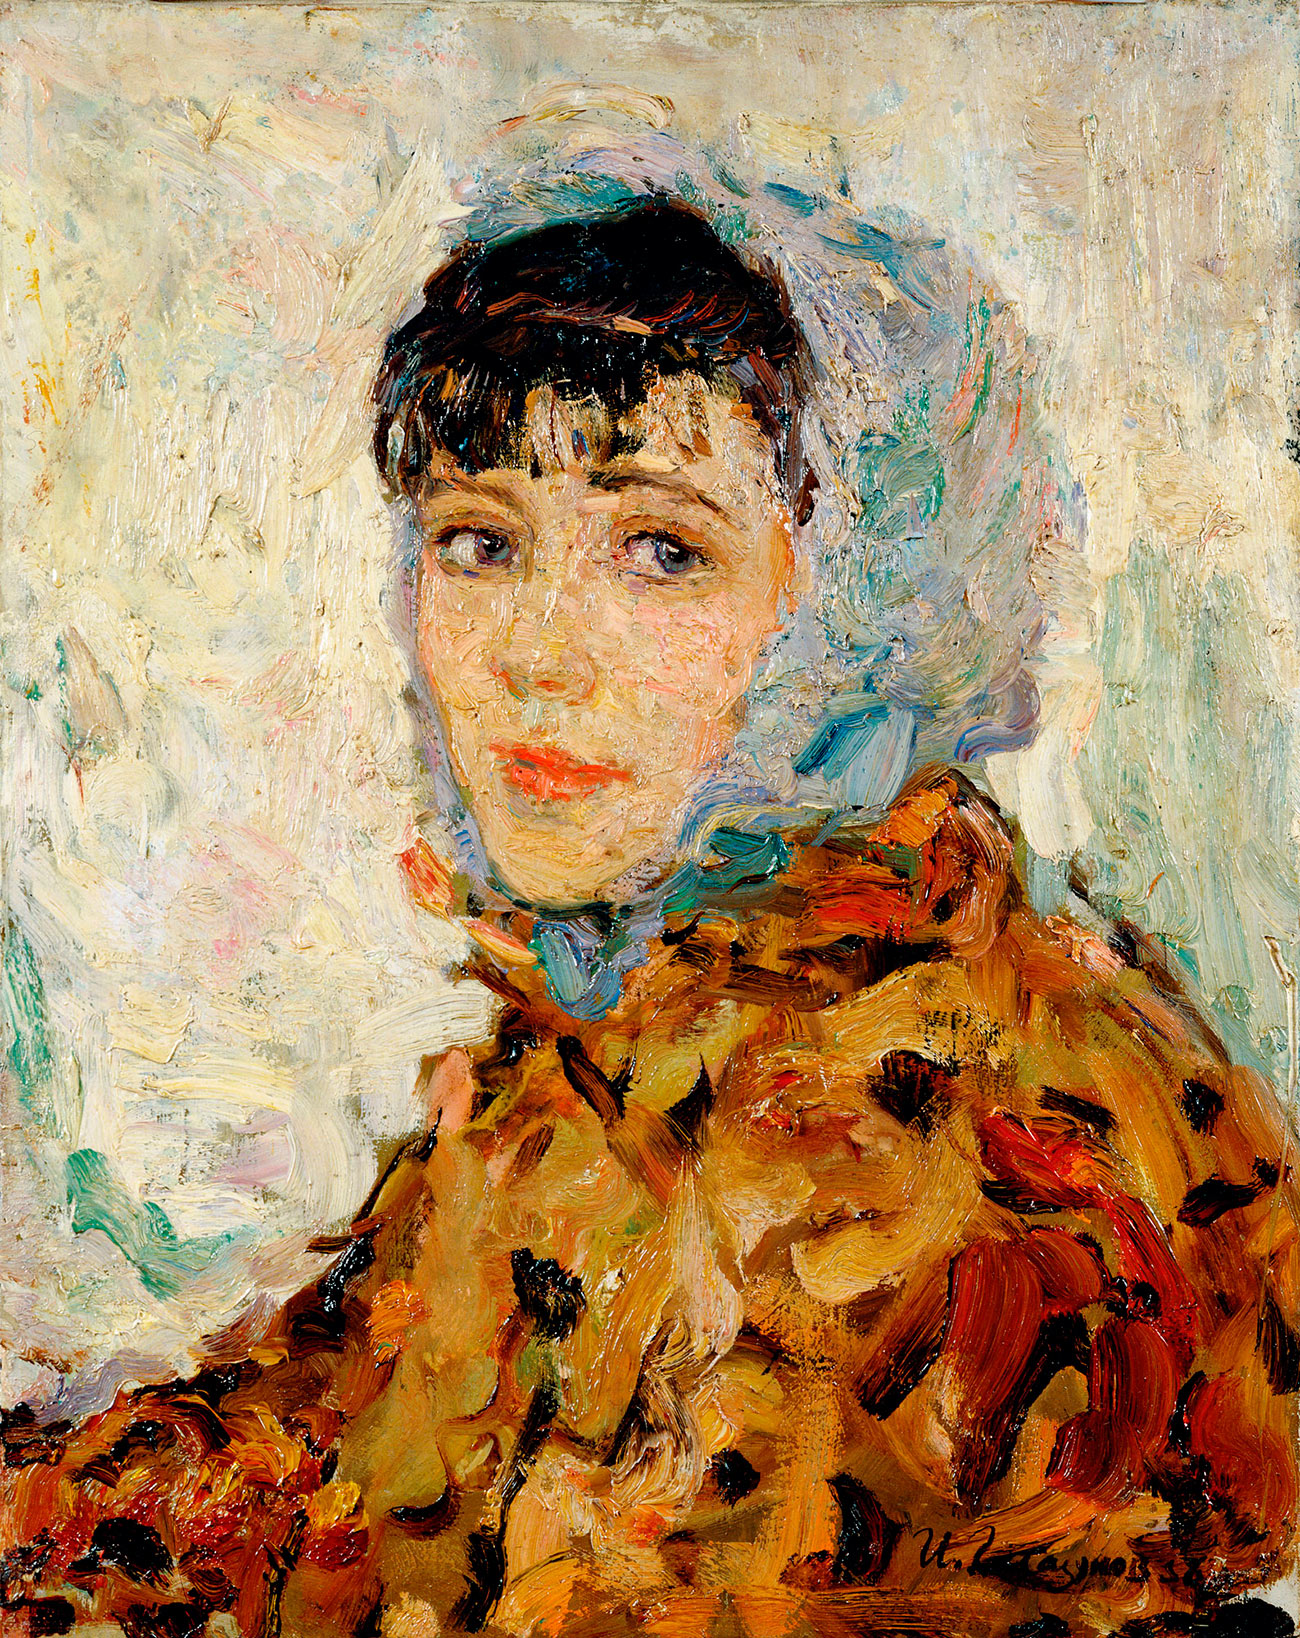 A person that Glazunov loved to paint the most was his wife. He was married to Nina Vinogradova-Benois, a member of Russia’s famous Benois family and a talented costume artist who sacrificed her own career to serve the genius of Glazunov. She not only donated her blood when the family was going through difficult times, but put up with the amorous character of her artistic and emotional husband who had many love affairs. 